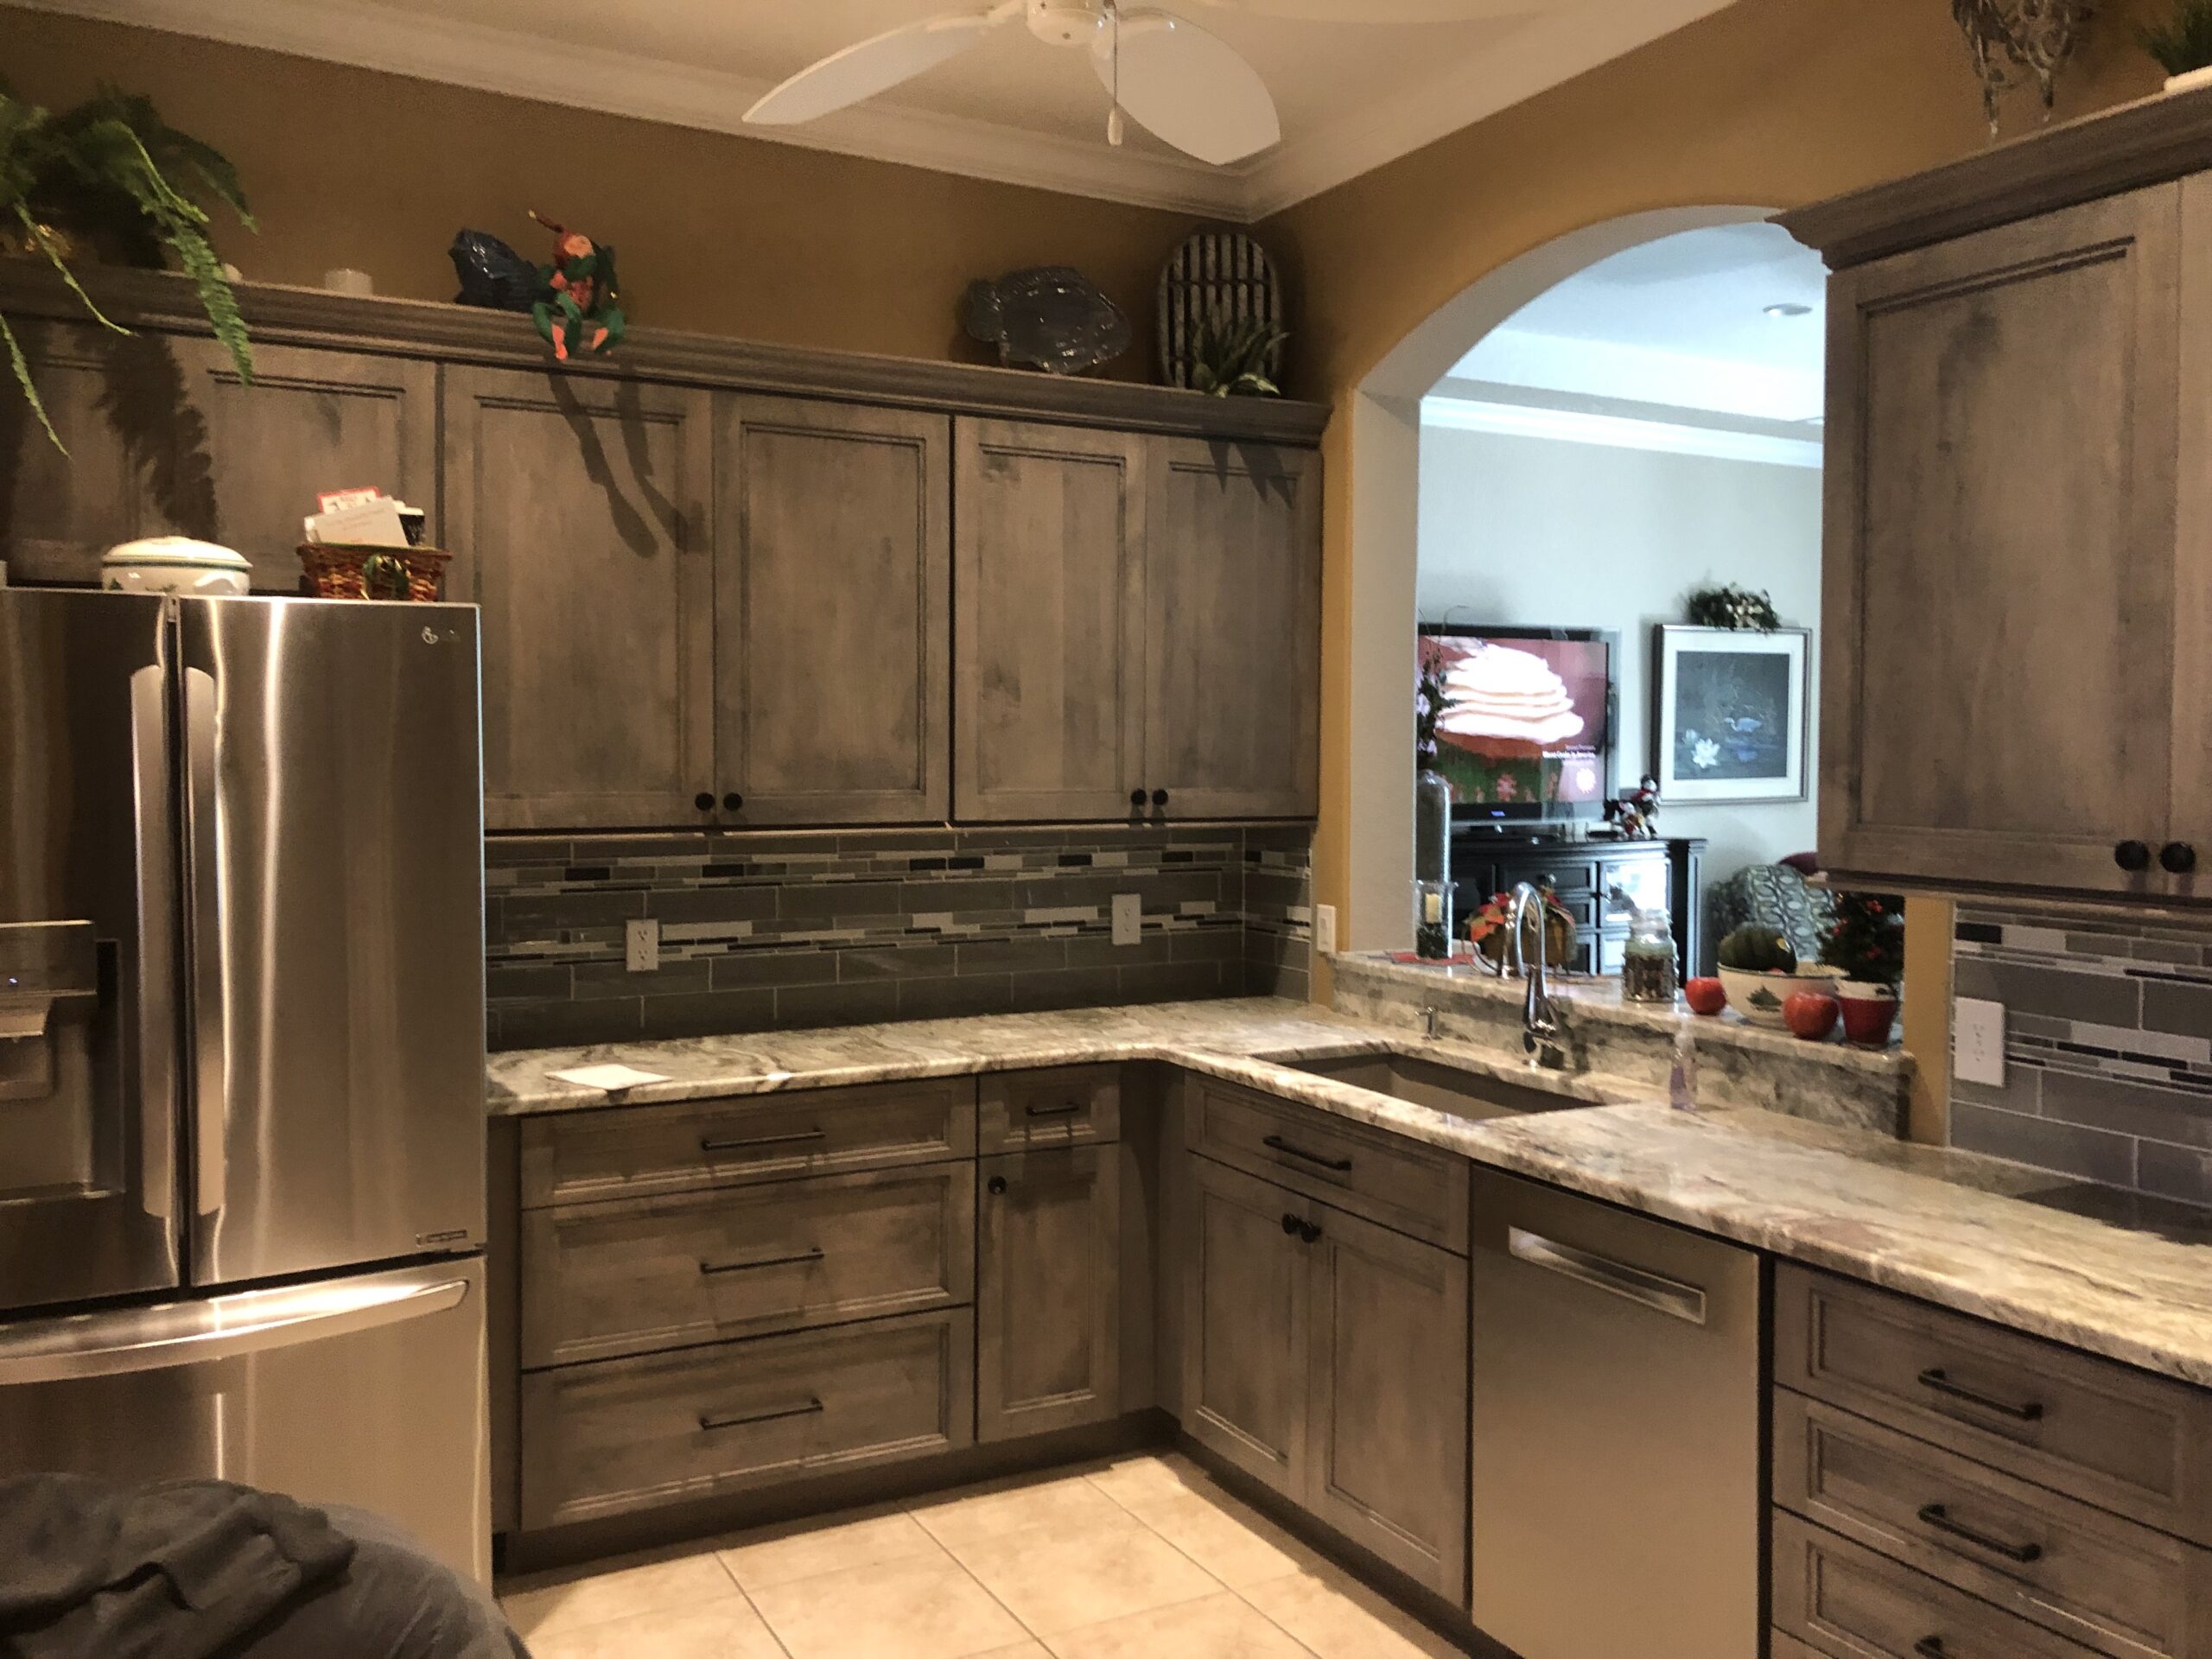 Modern, Stylish, and High Quality Stained Cherry Kitchen Cabinet Refacing in Keystone